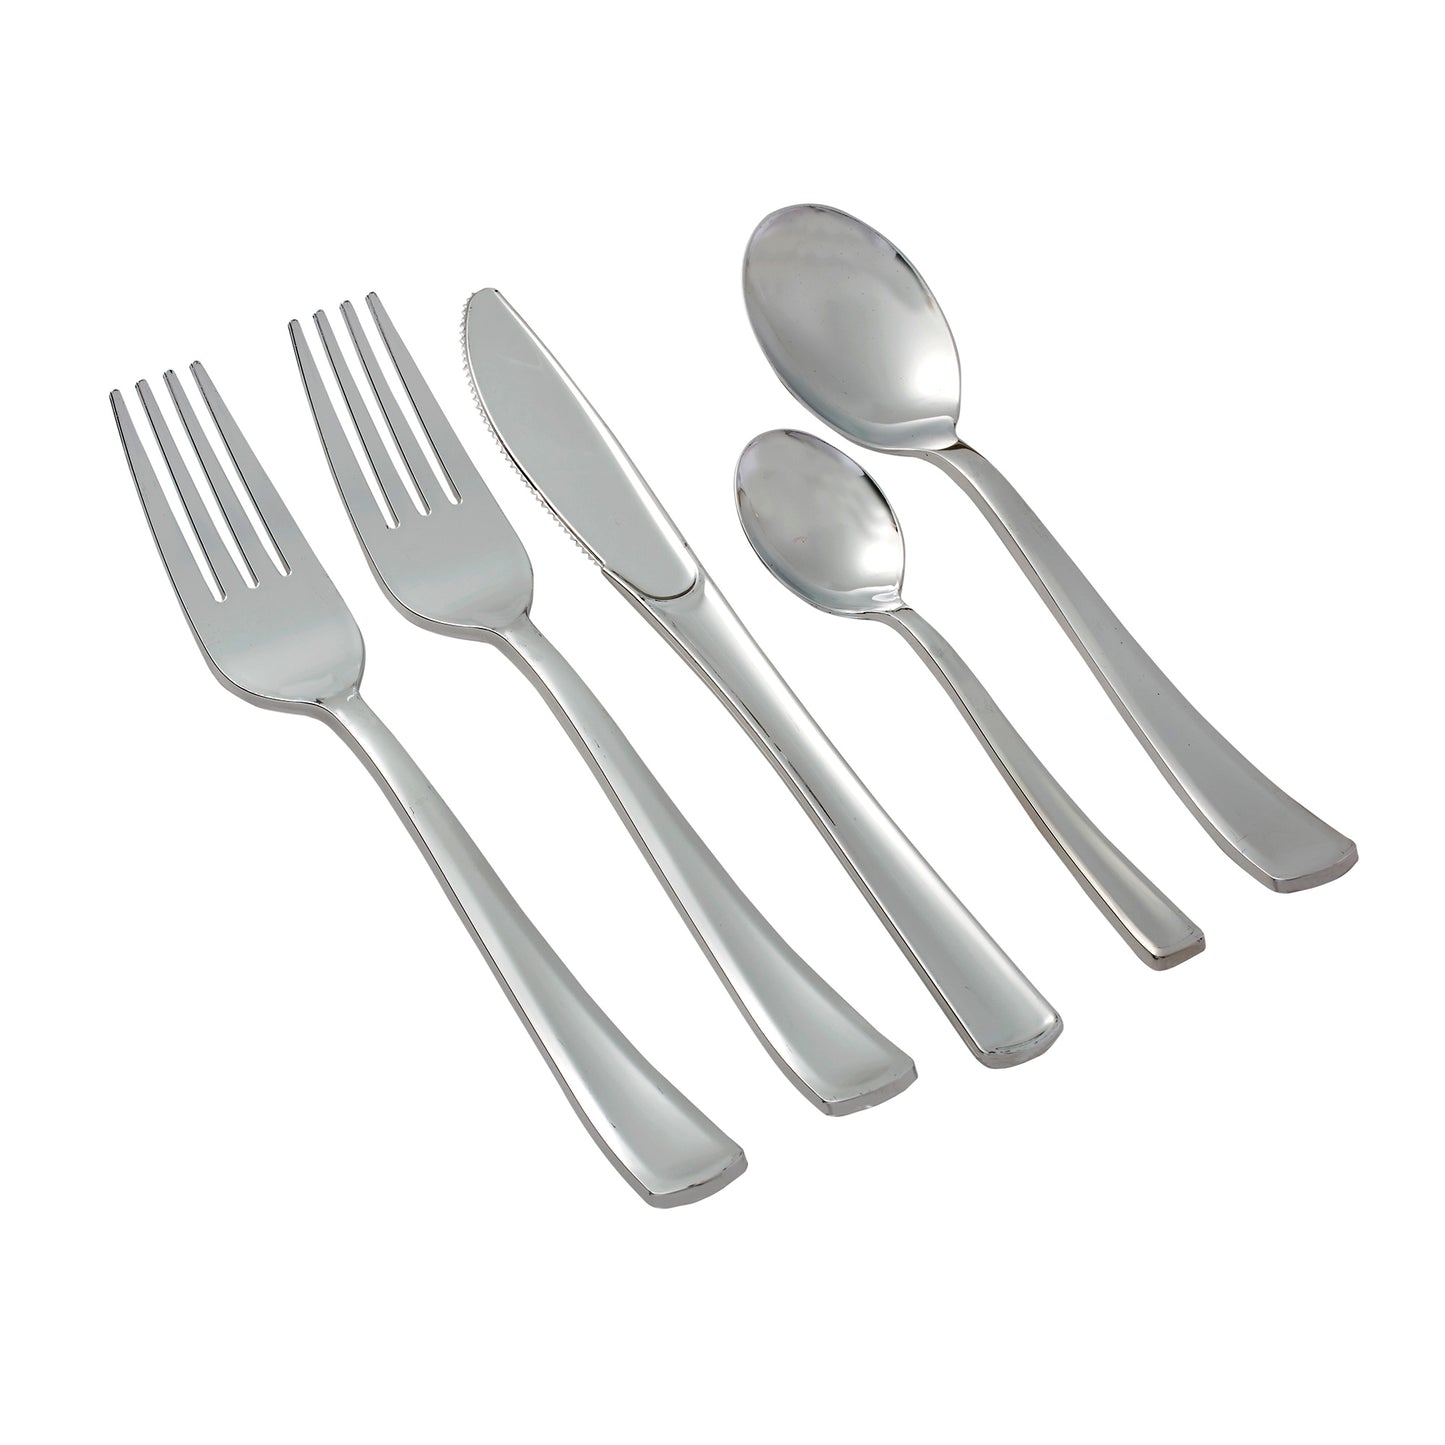 250 piece Silver-colored Plastic Silverware Set (for 50 guests): 100 forks 50 knives 50 spoons and 50 mini spoons